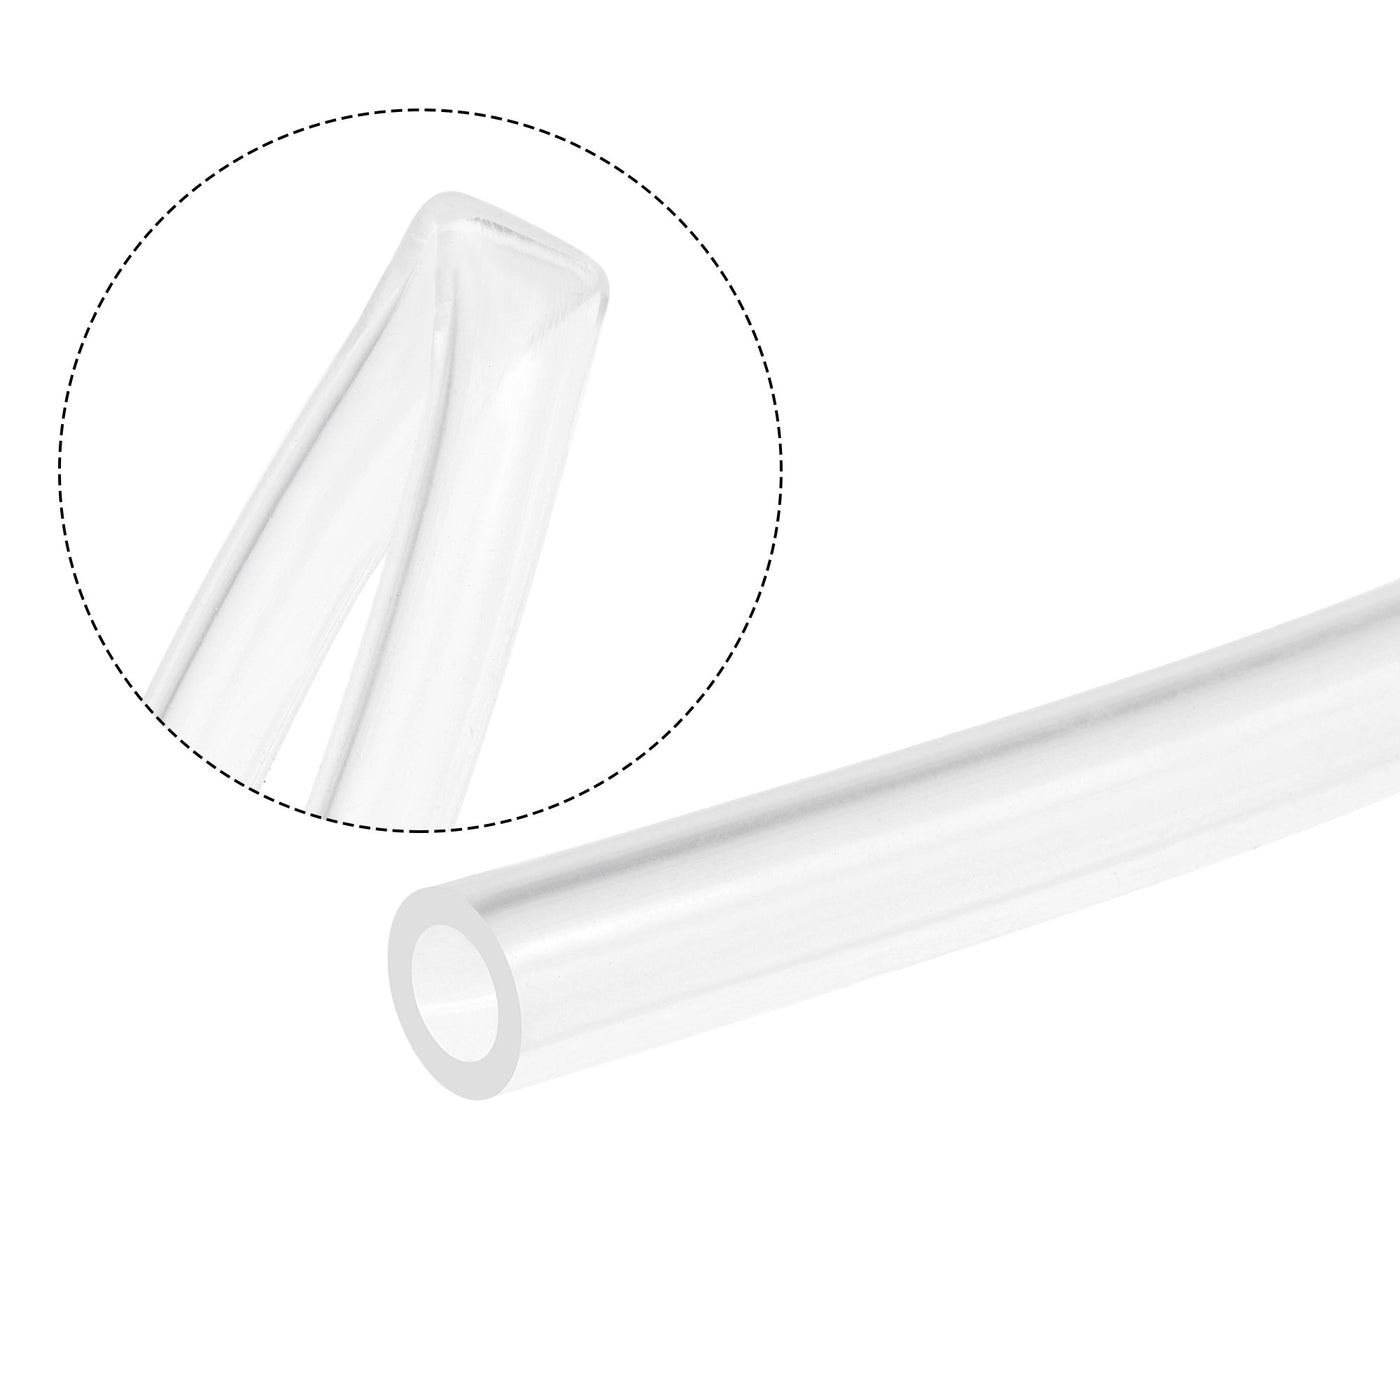 Uxcell Uxcell Clear Silicone Tubing, 5/32"(4mm) ID 9/32"(7mm) OD 1/16" Wall 20ft, Flexible Silicone Tube for Air Water Pipe Pump Transfer